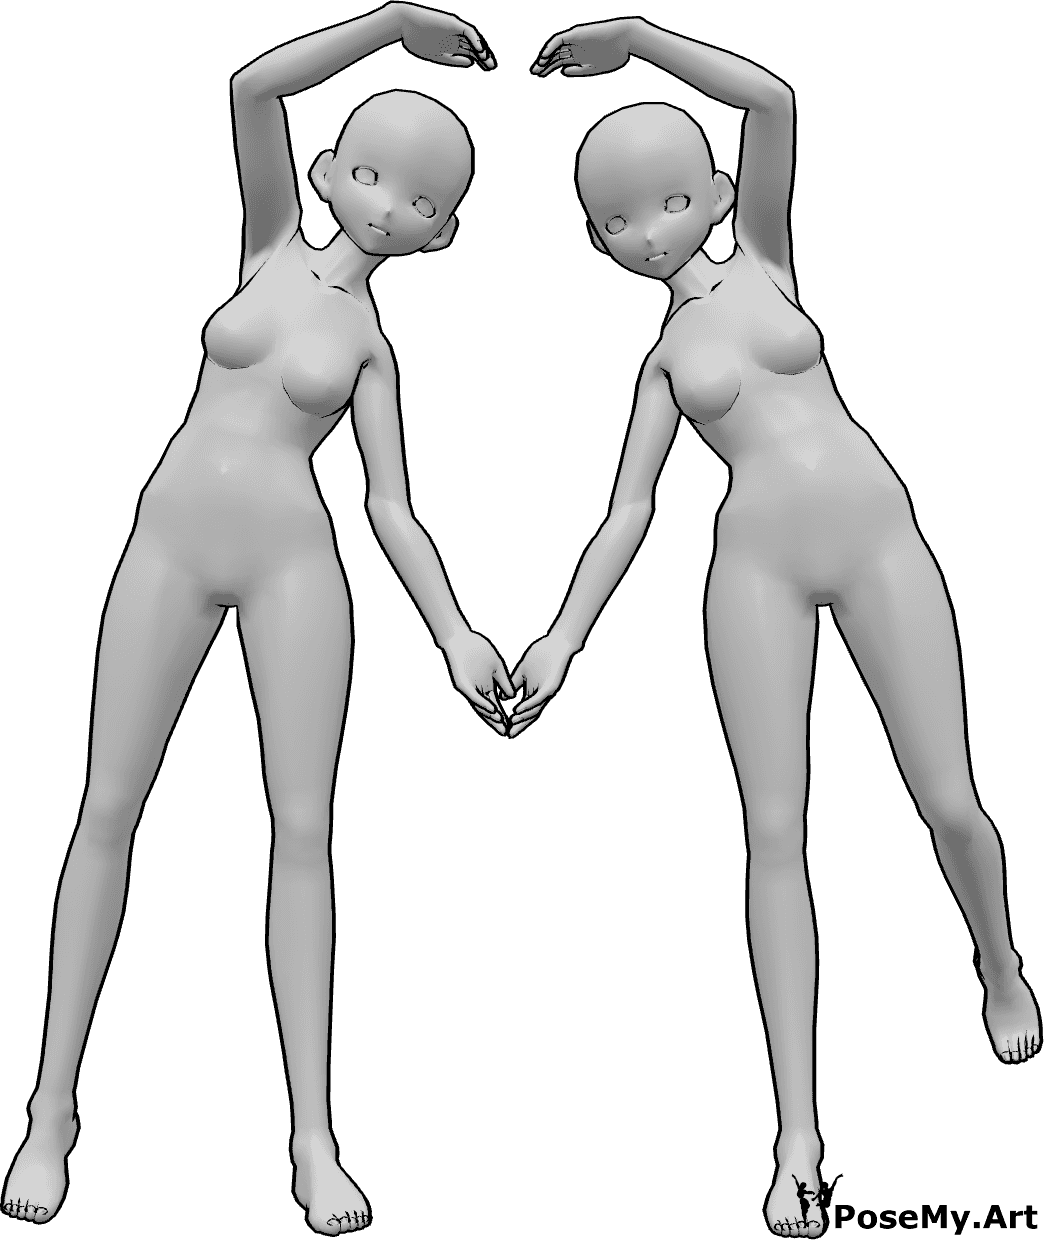 Pose Reference- Anime heart pose - Two anime females are making a heart with their arms